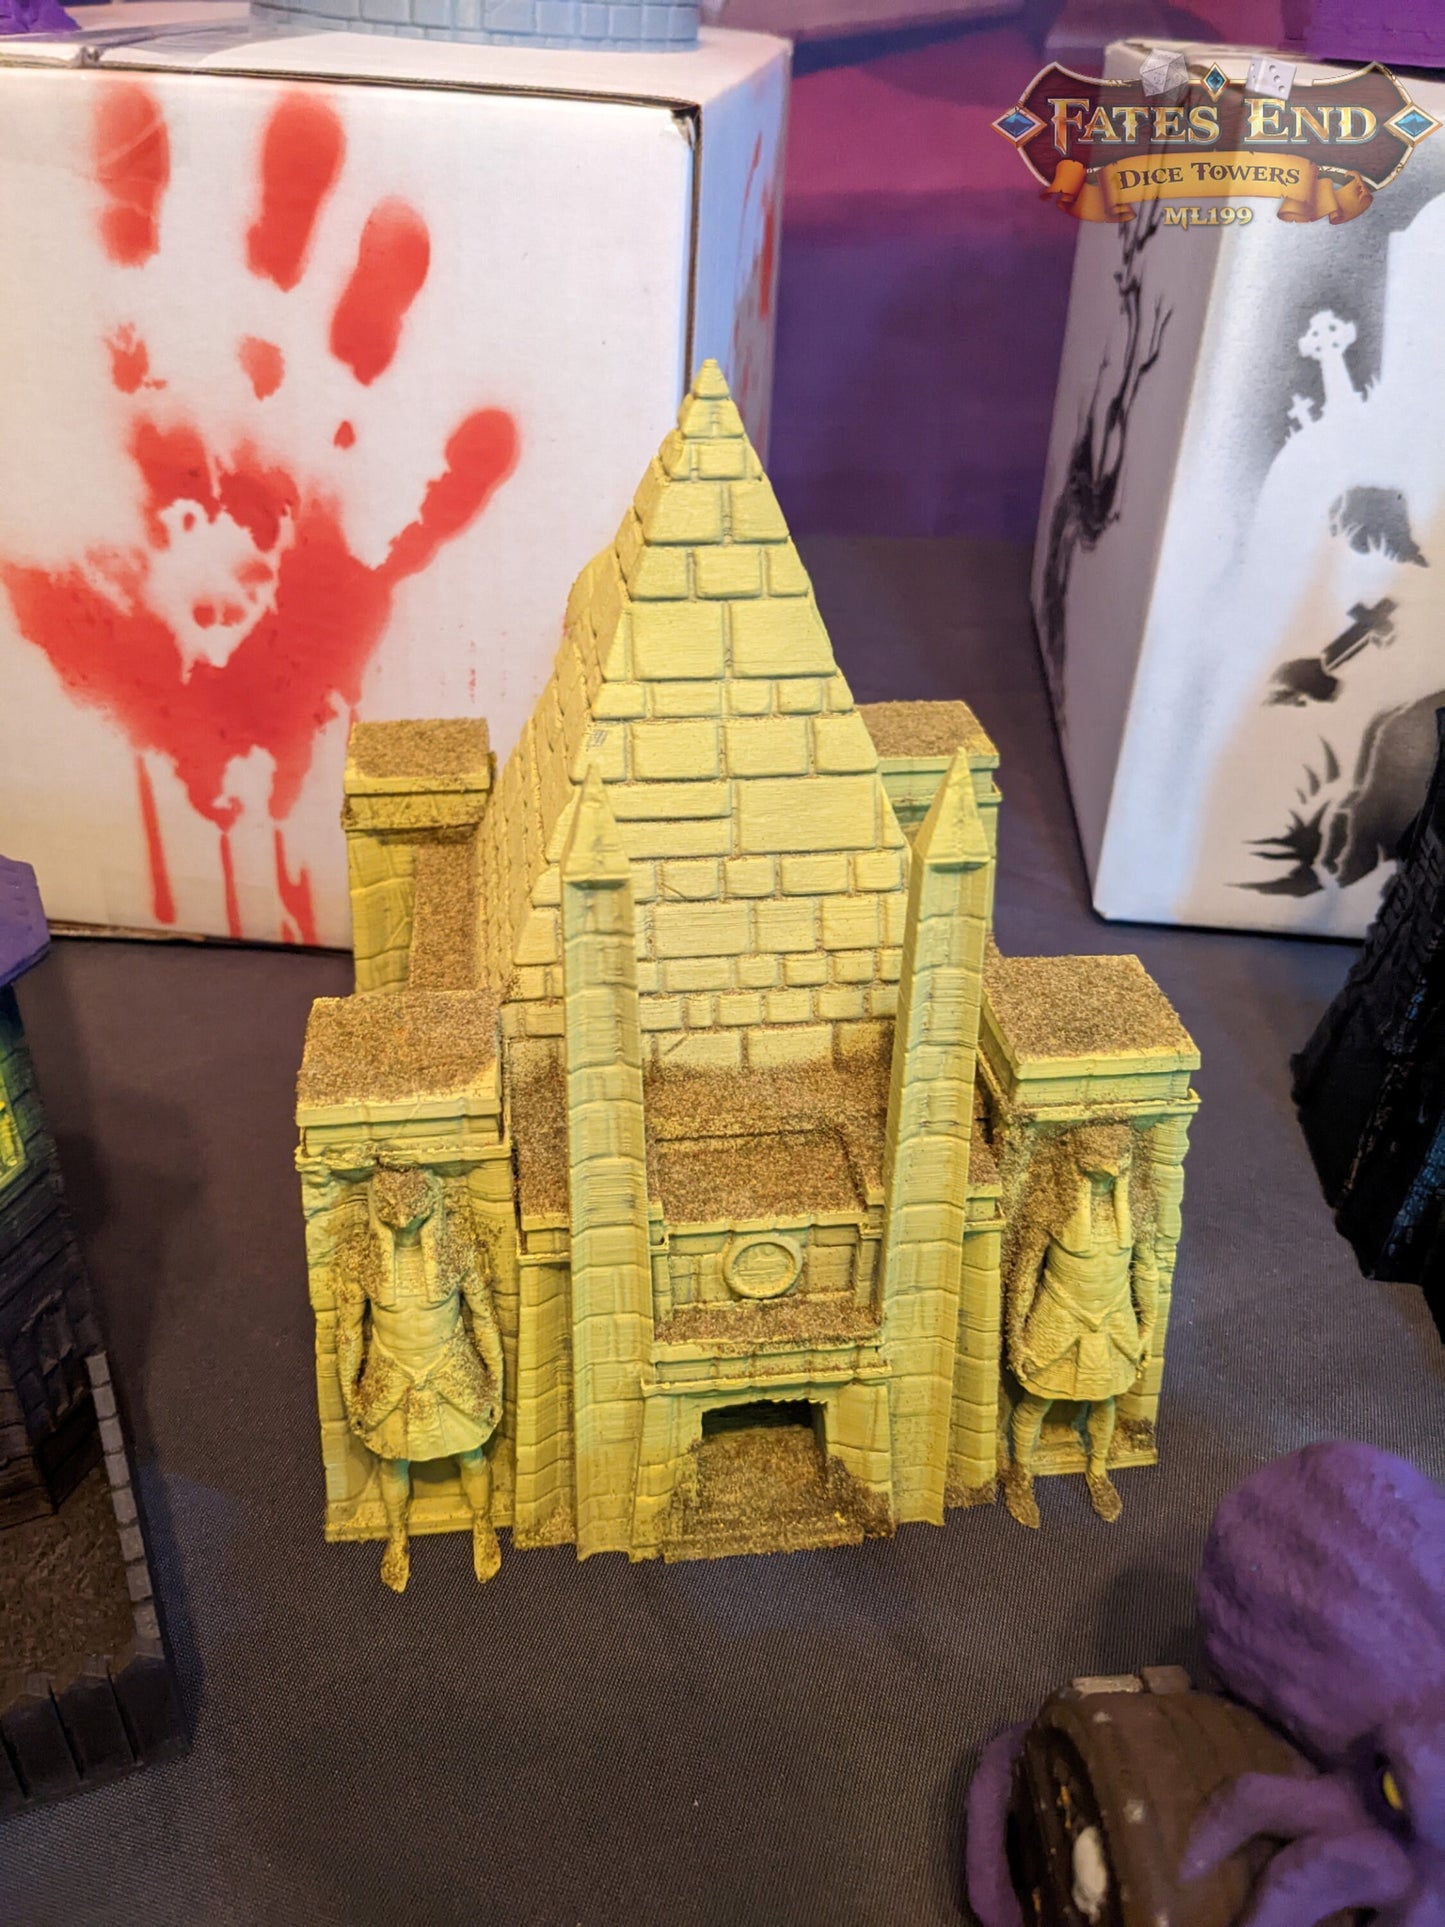 Gothic Horror Mystery Loot Box - Dice Towers and Dice Jails/Prisons/Vaults - Hand Painted and Non-Hand Painted Options- DnD D&D RPG Cosplay